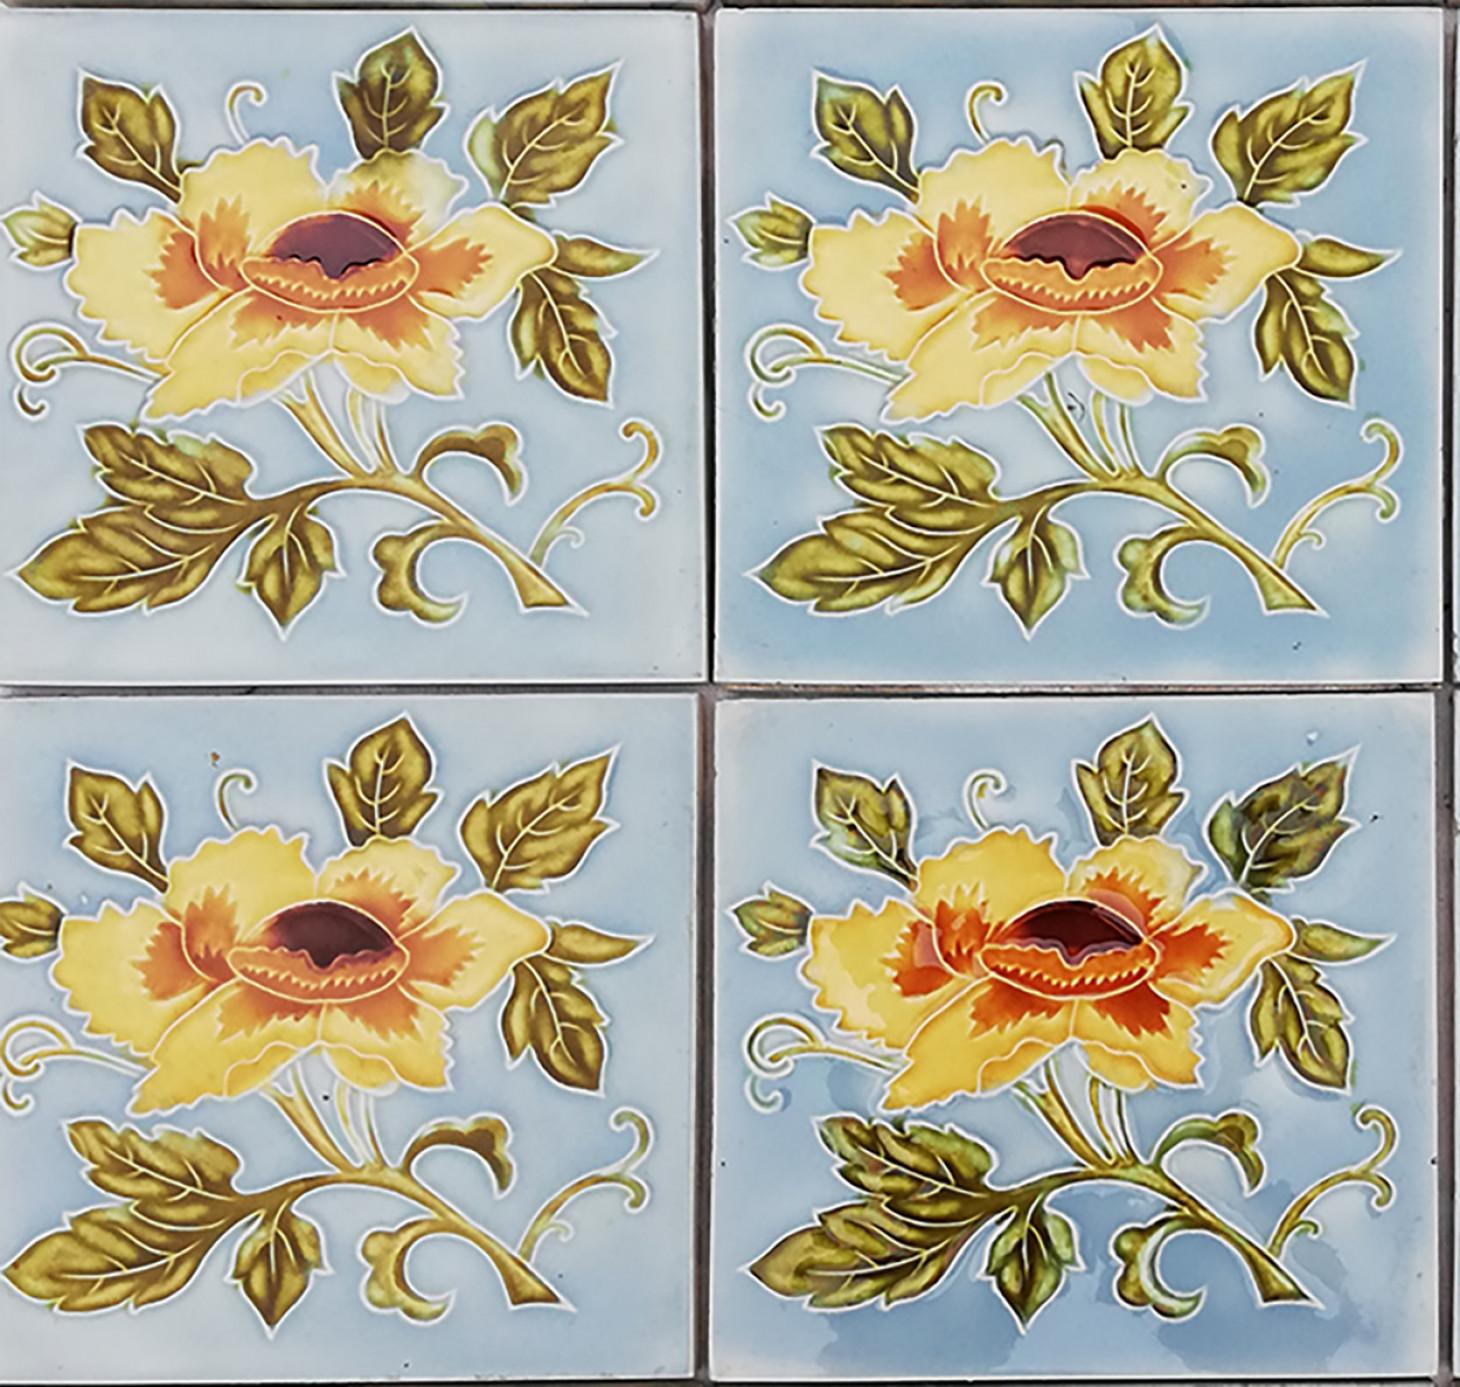 This is an amazing set of antique Art Nouveau handmade tiles with an image of yellow rose in relief on a soft greyblue background. These tiles would be charming displayed on easels, framed or incorporated into a custom tile design.

Please note that